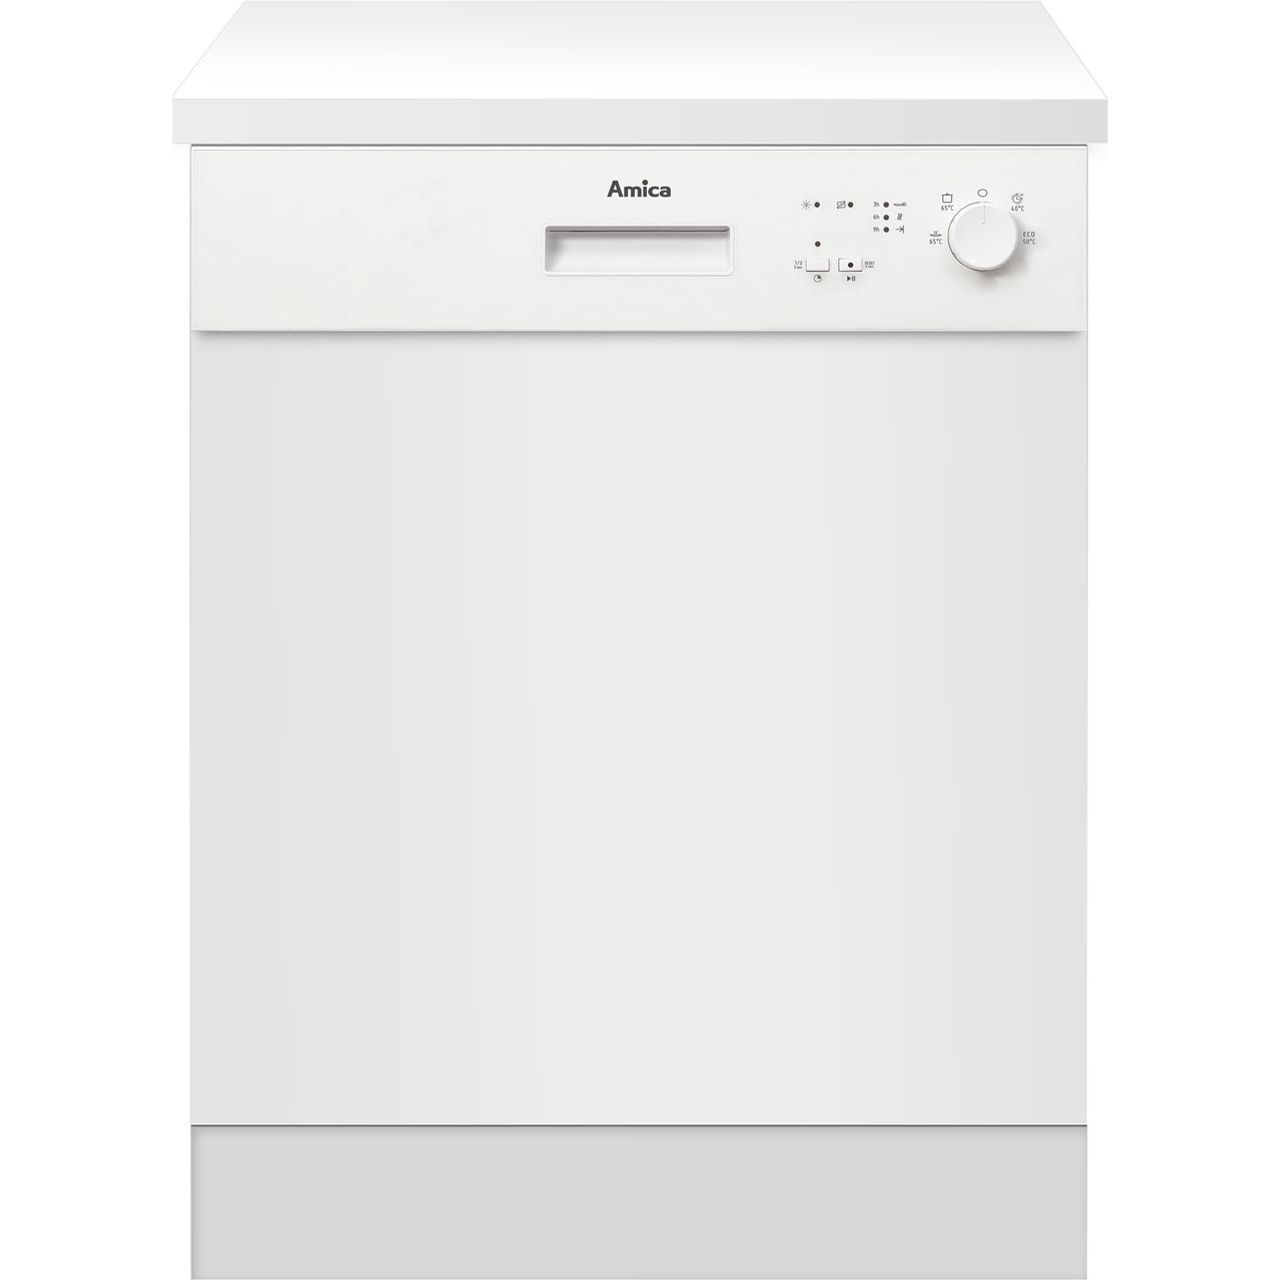 amica dishwasher review